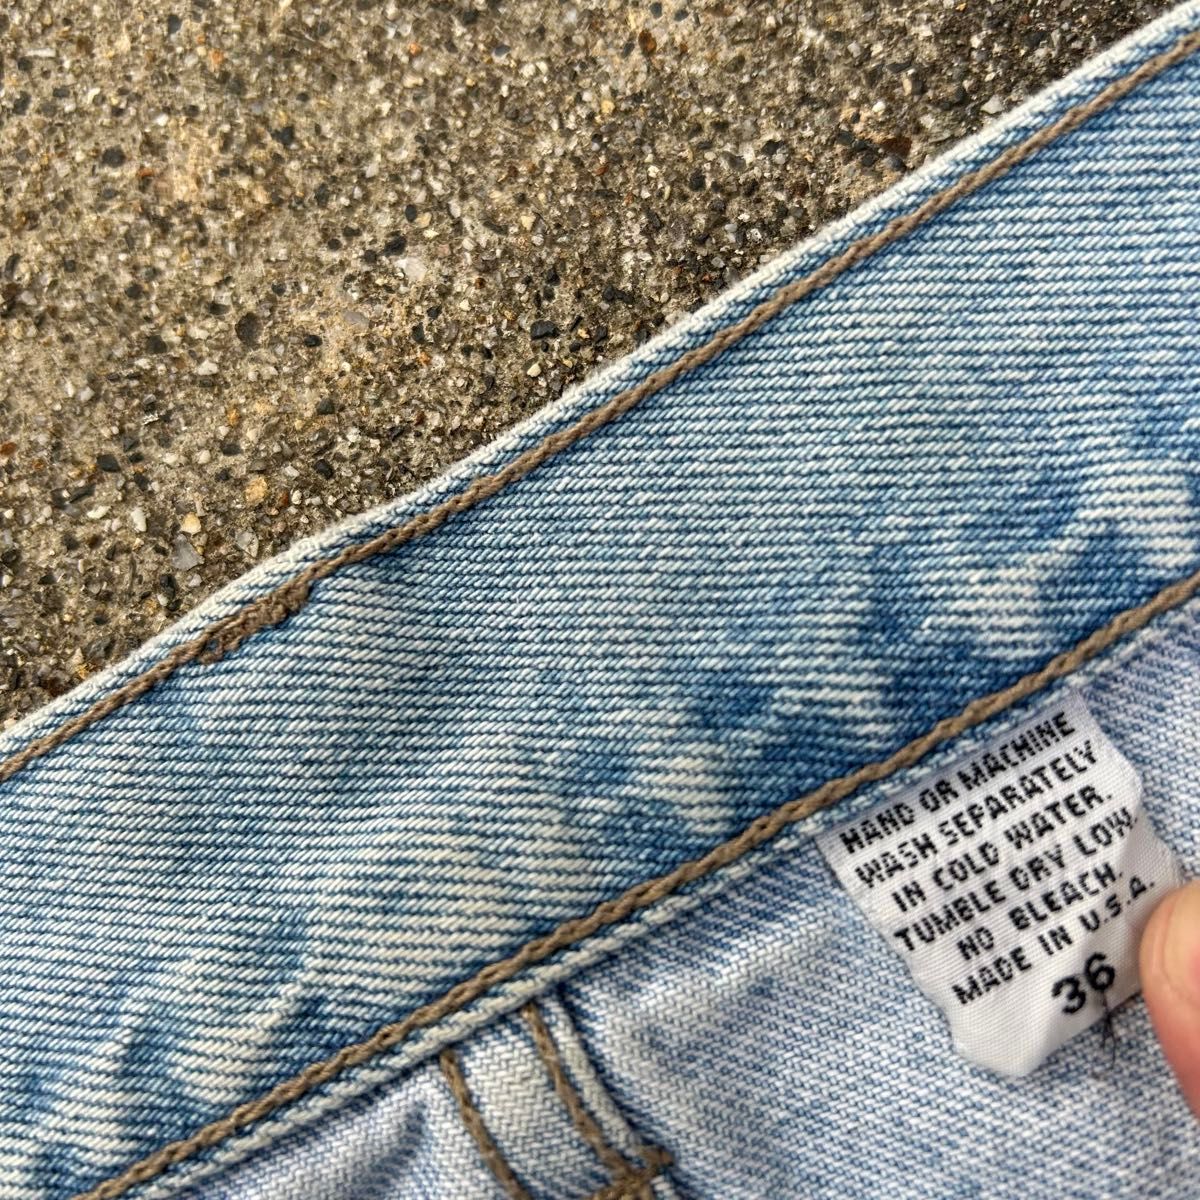 SOLO vintage made in usa used denim